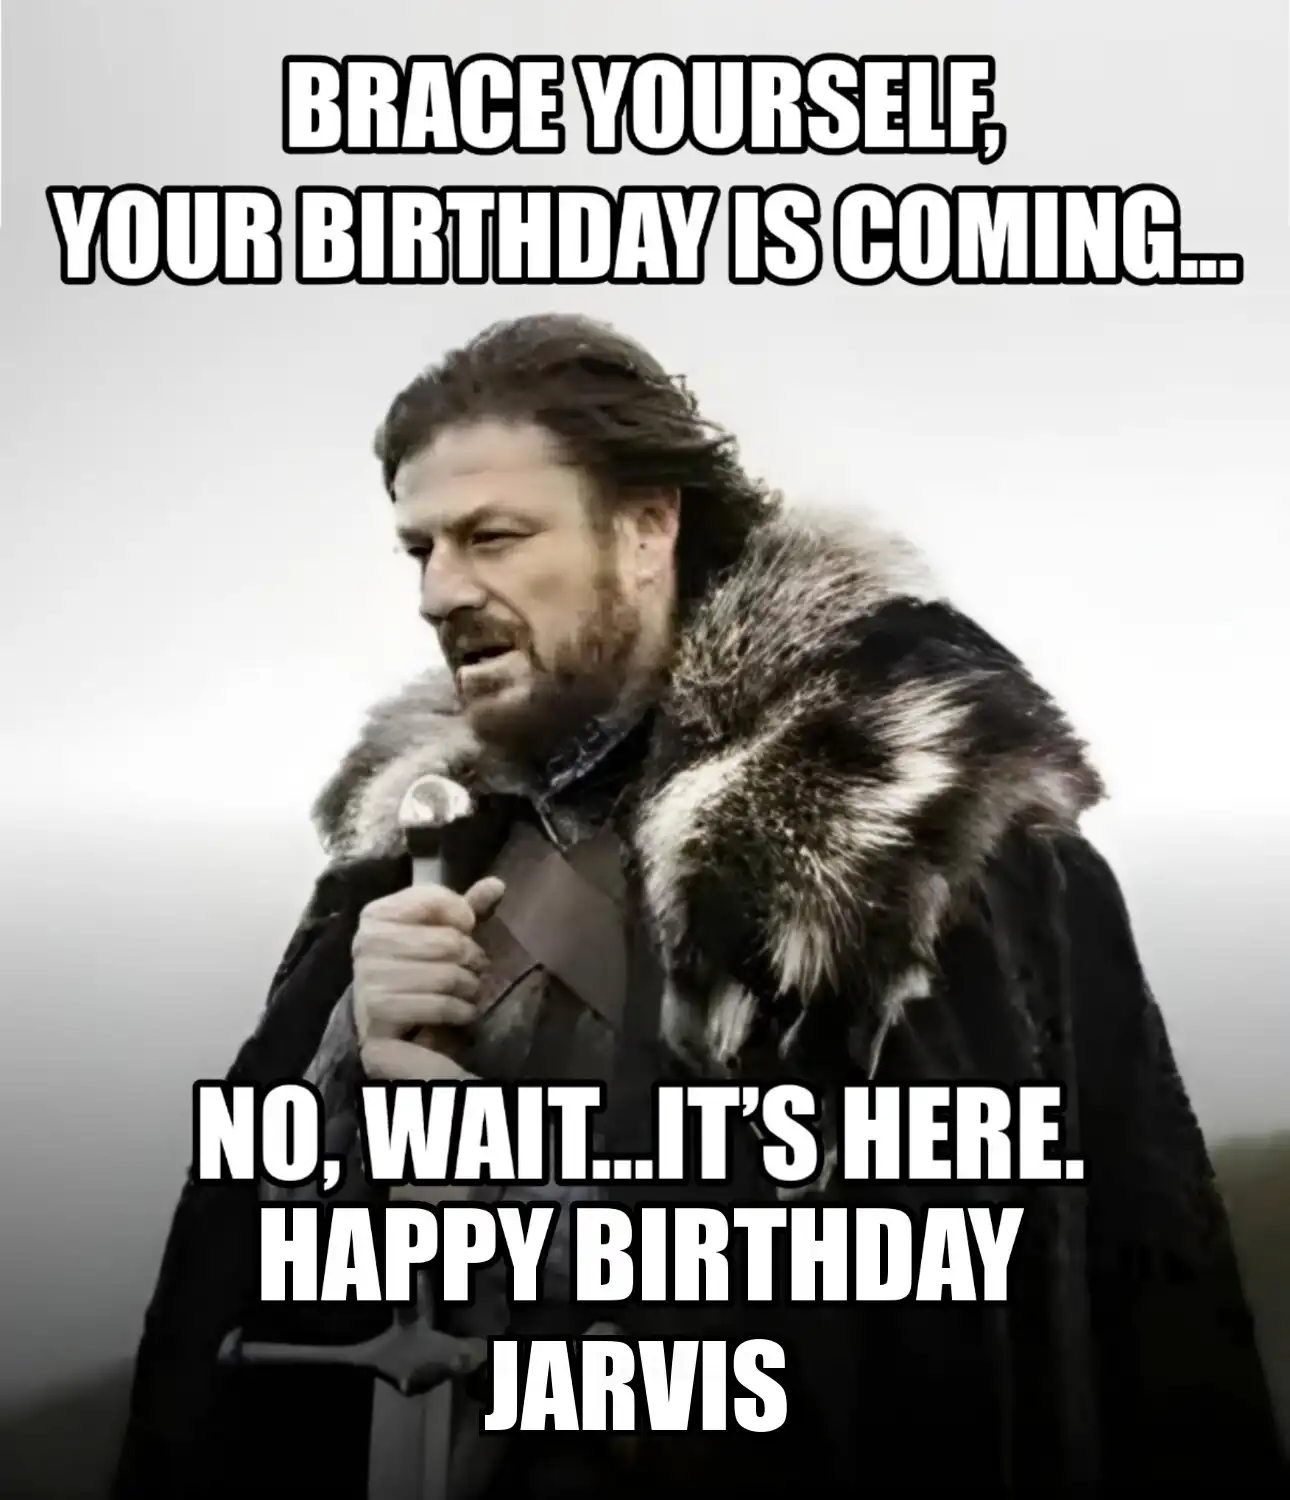 Happy Birthday Jarvis Brace Yourself Your Birthday Is Coming Meme